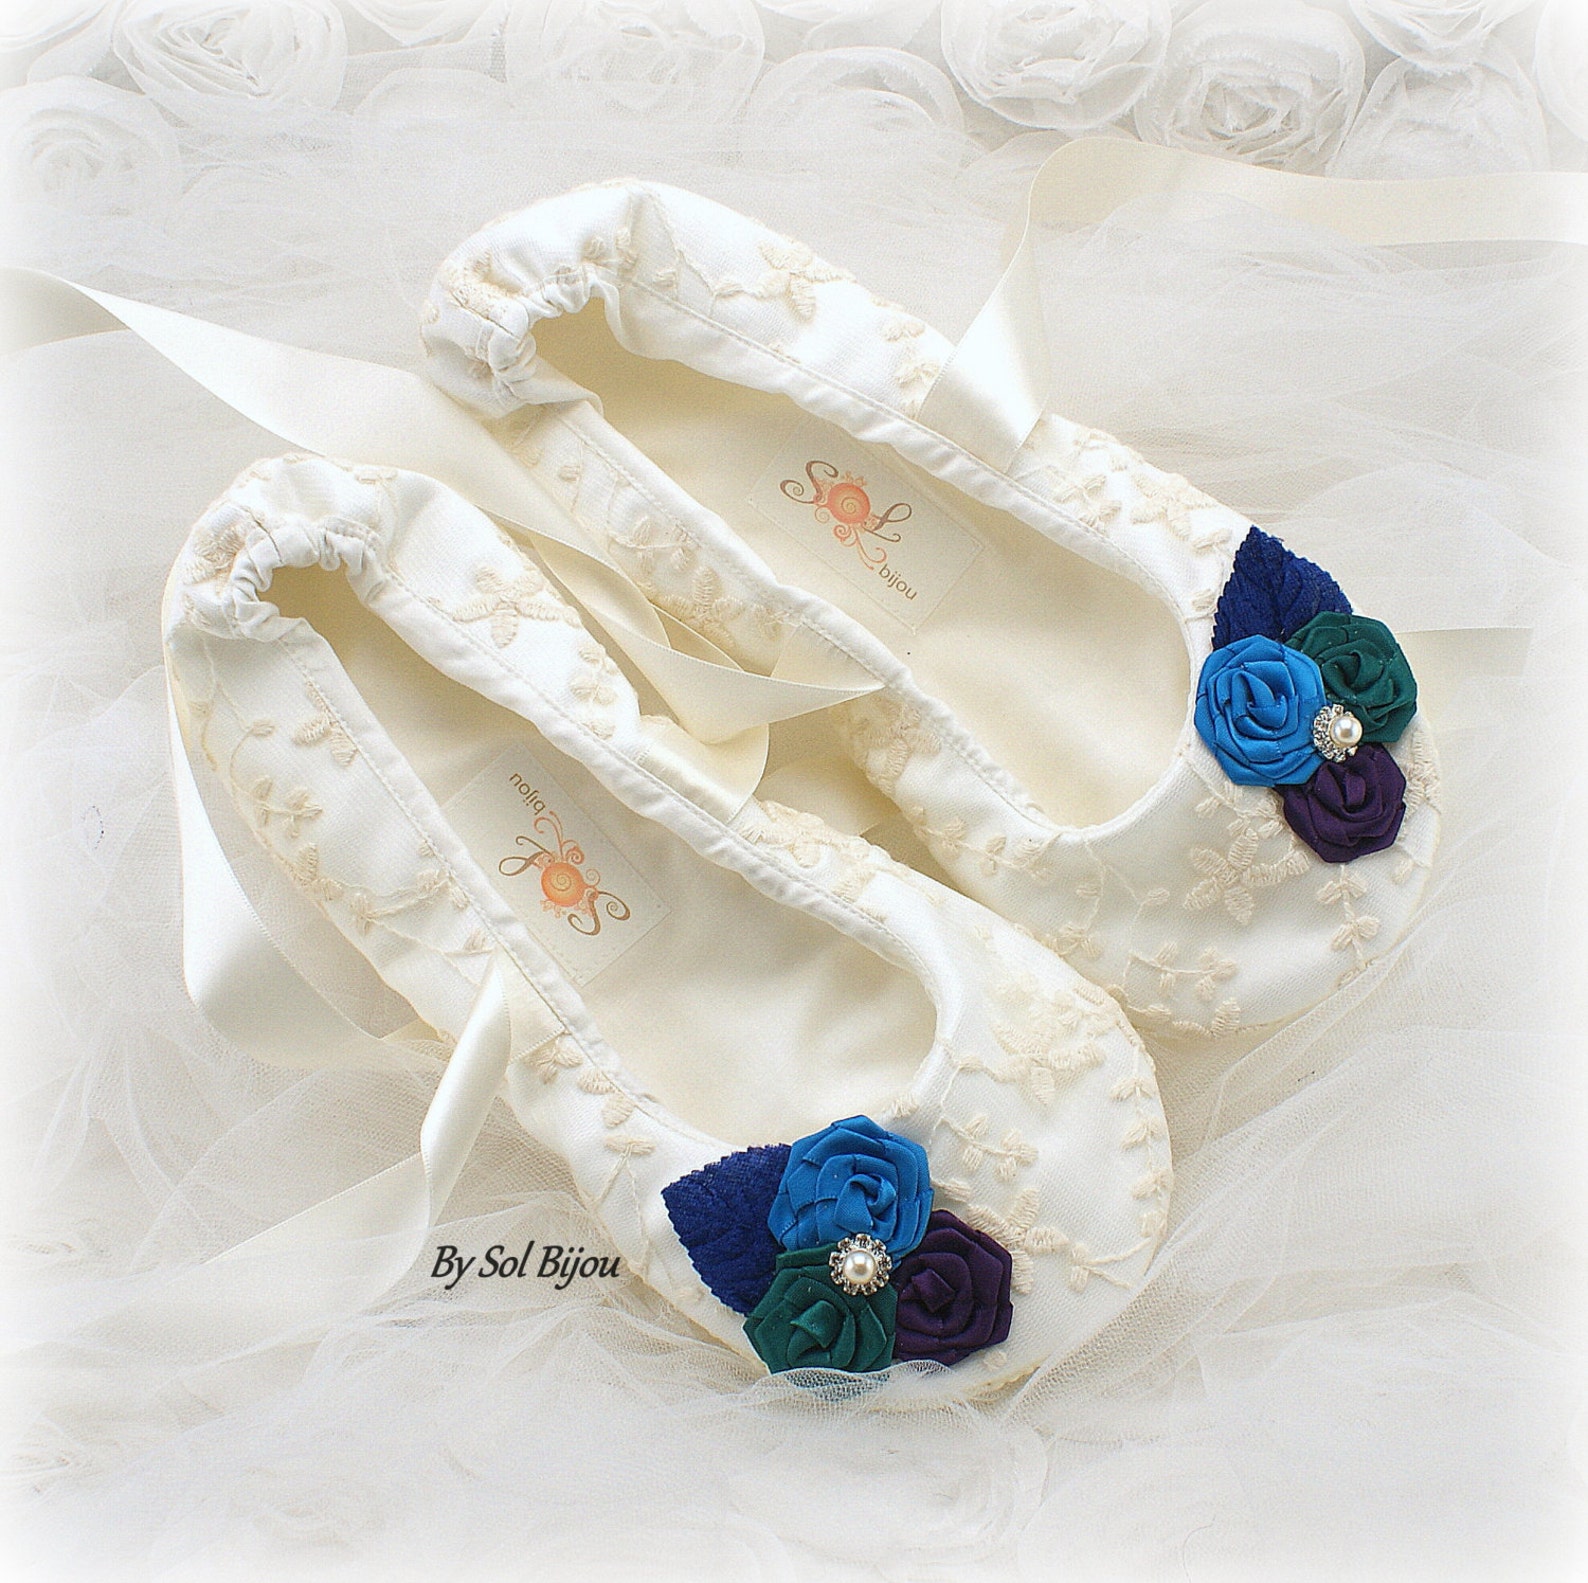 ballet flats,ivory, purple,blue, royal blue,turquoise,bridal,beach wedding,shoes,flats,ballerina slippers,flower girl, crystals,